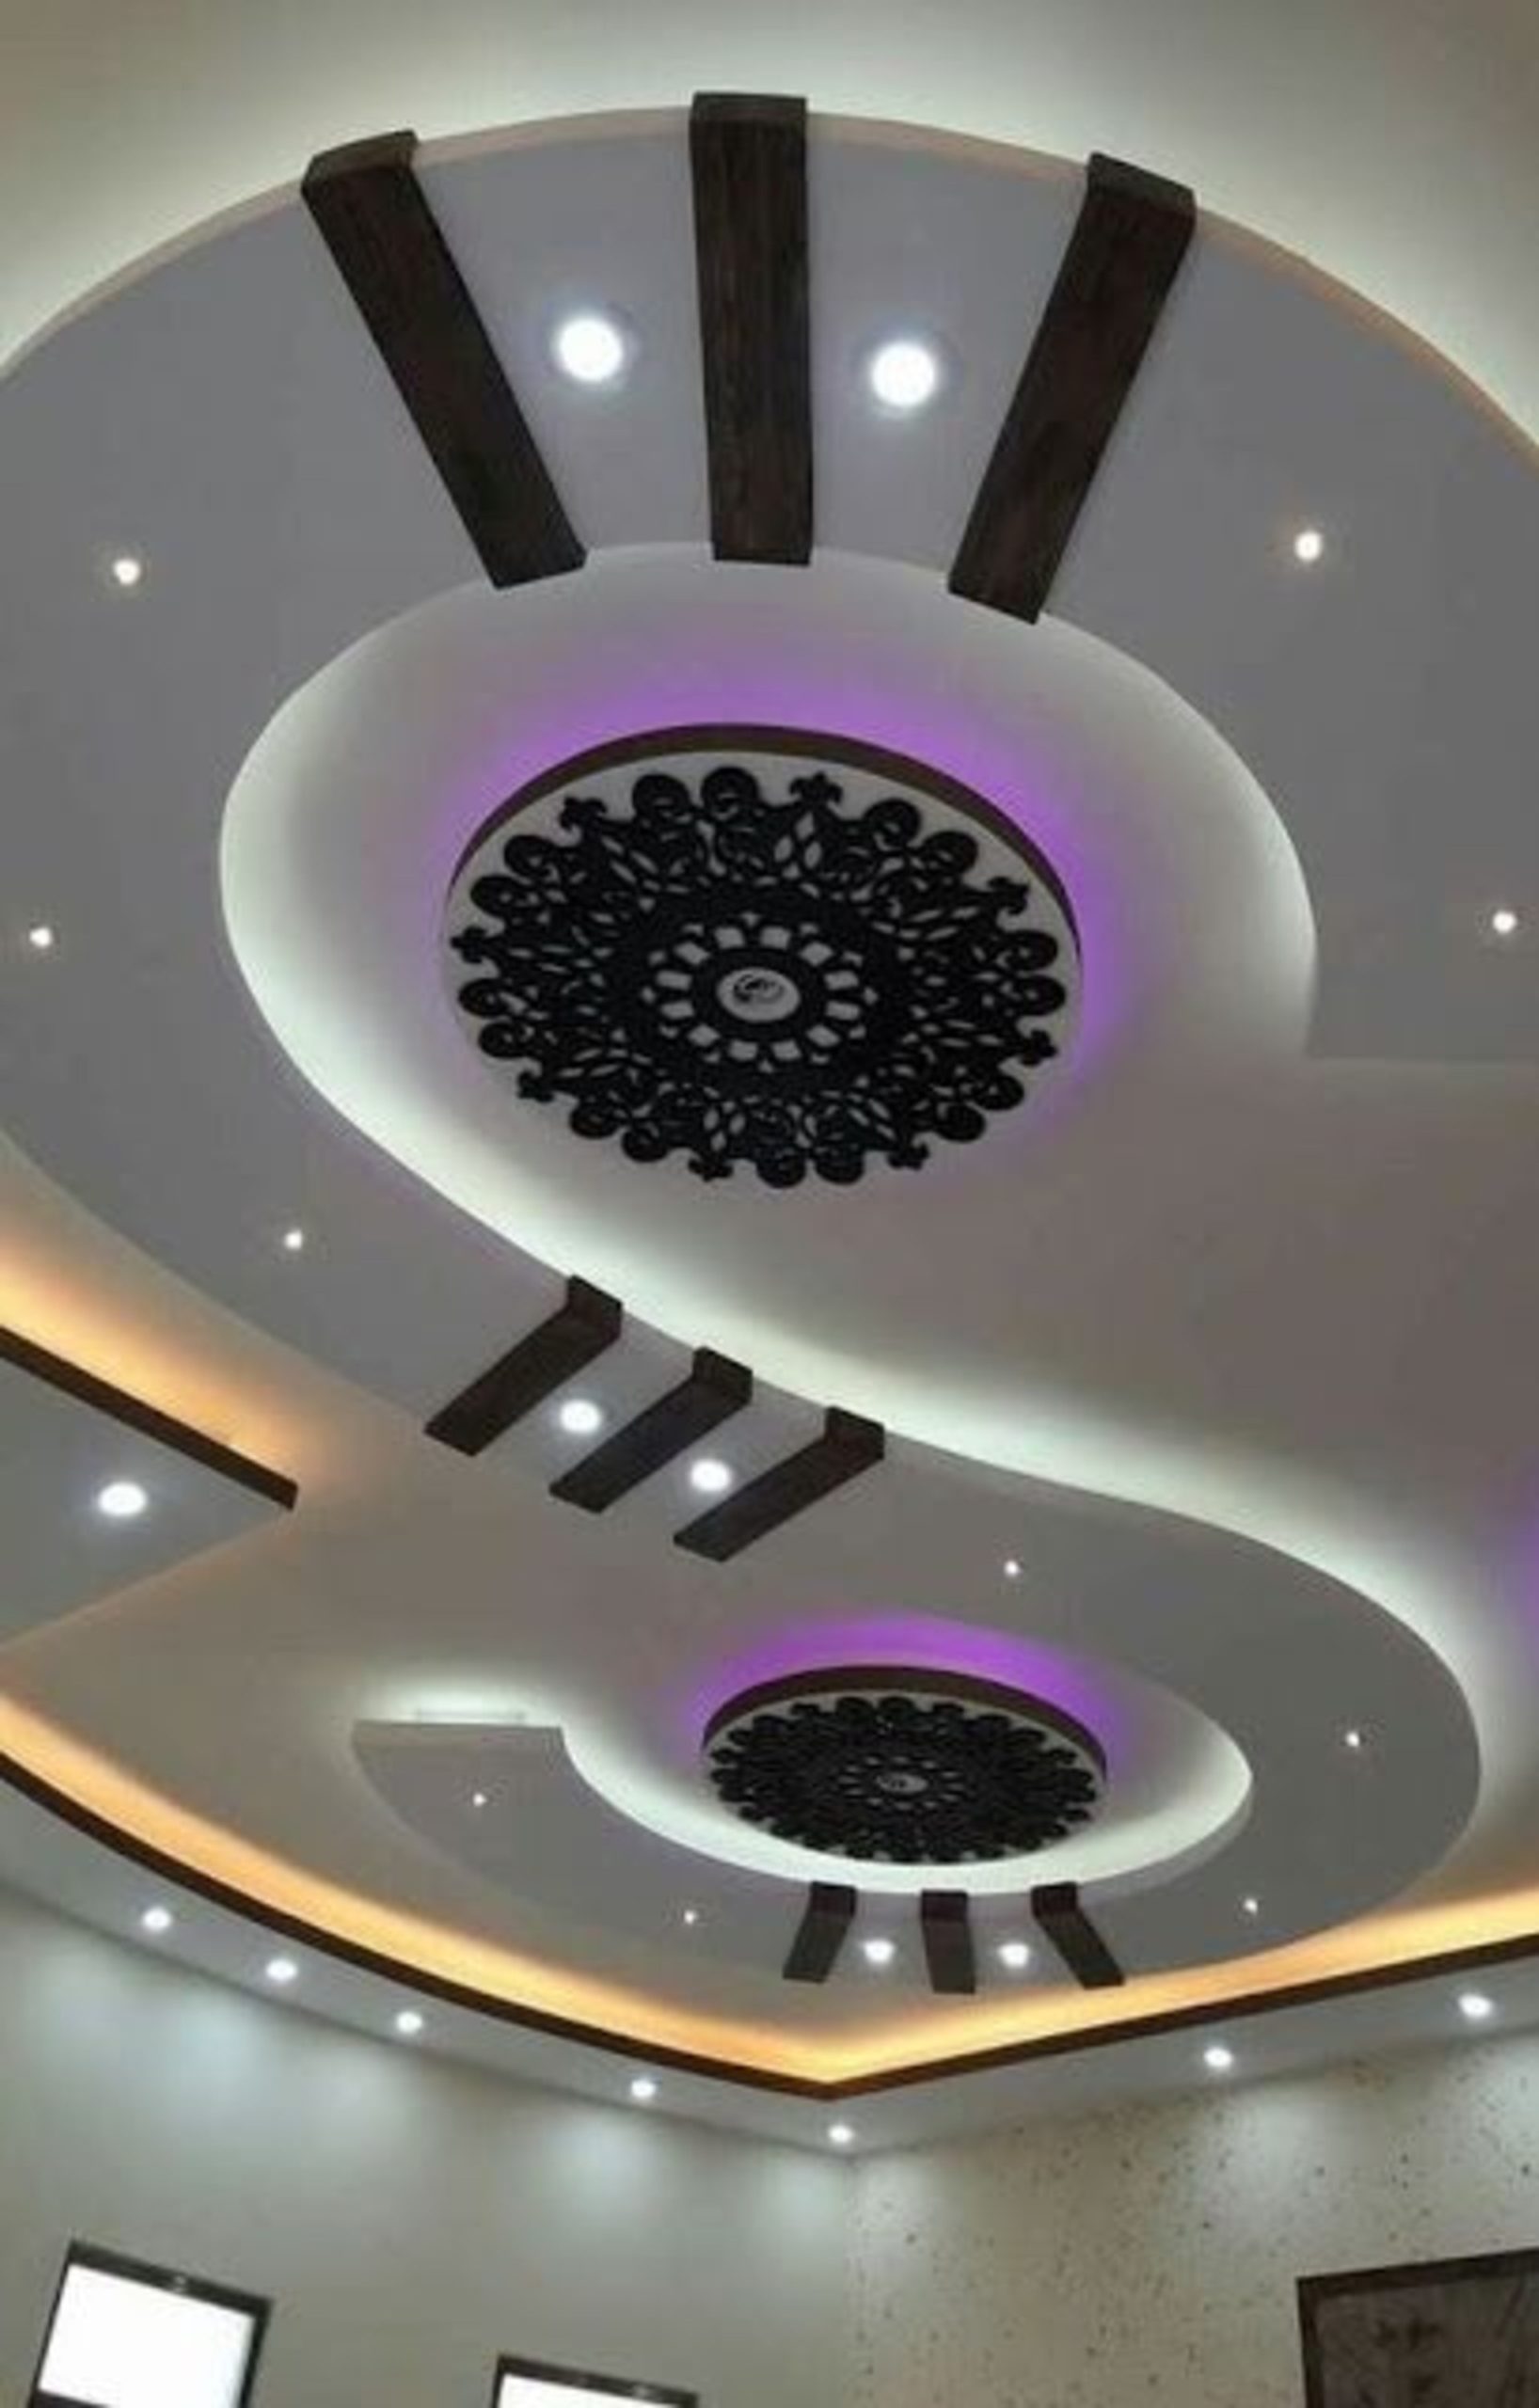 Modern Ceiling Design Ideas Engineering Discoveries